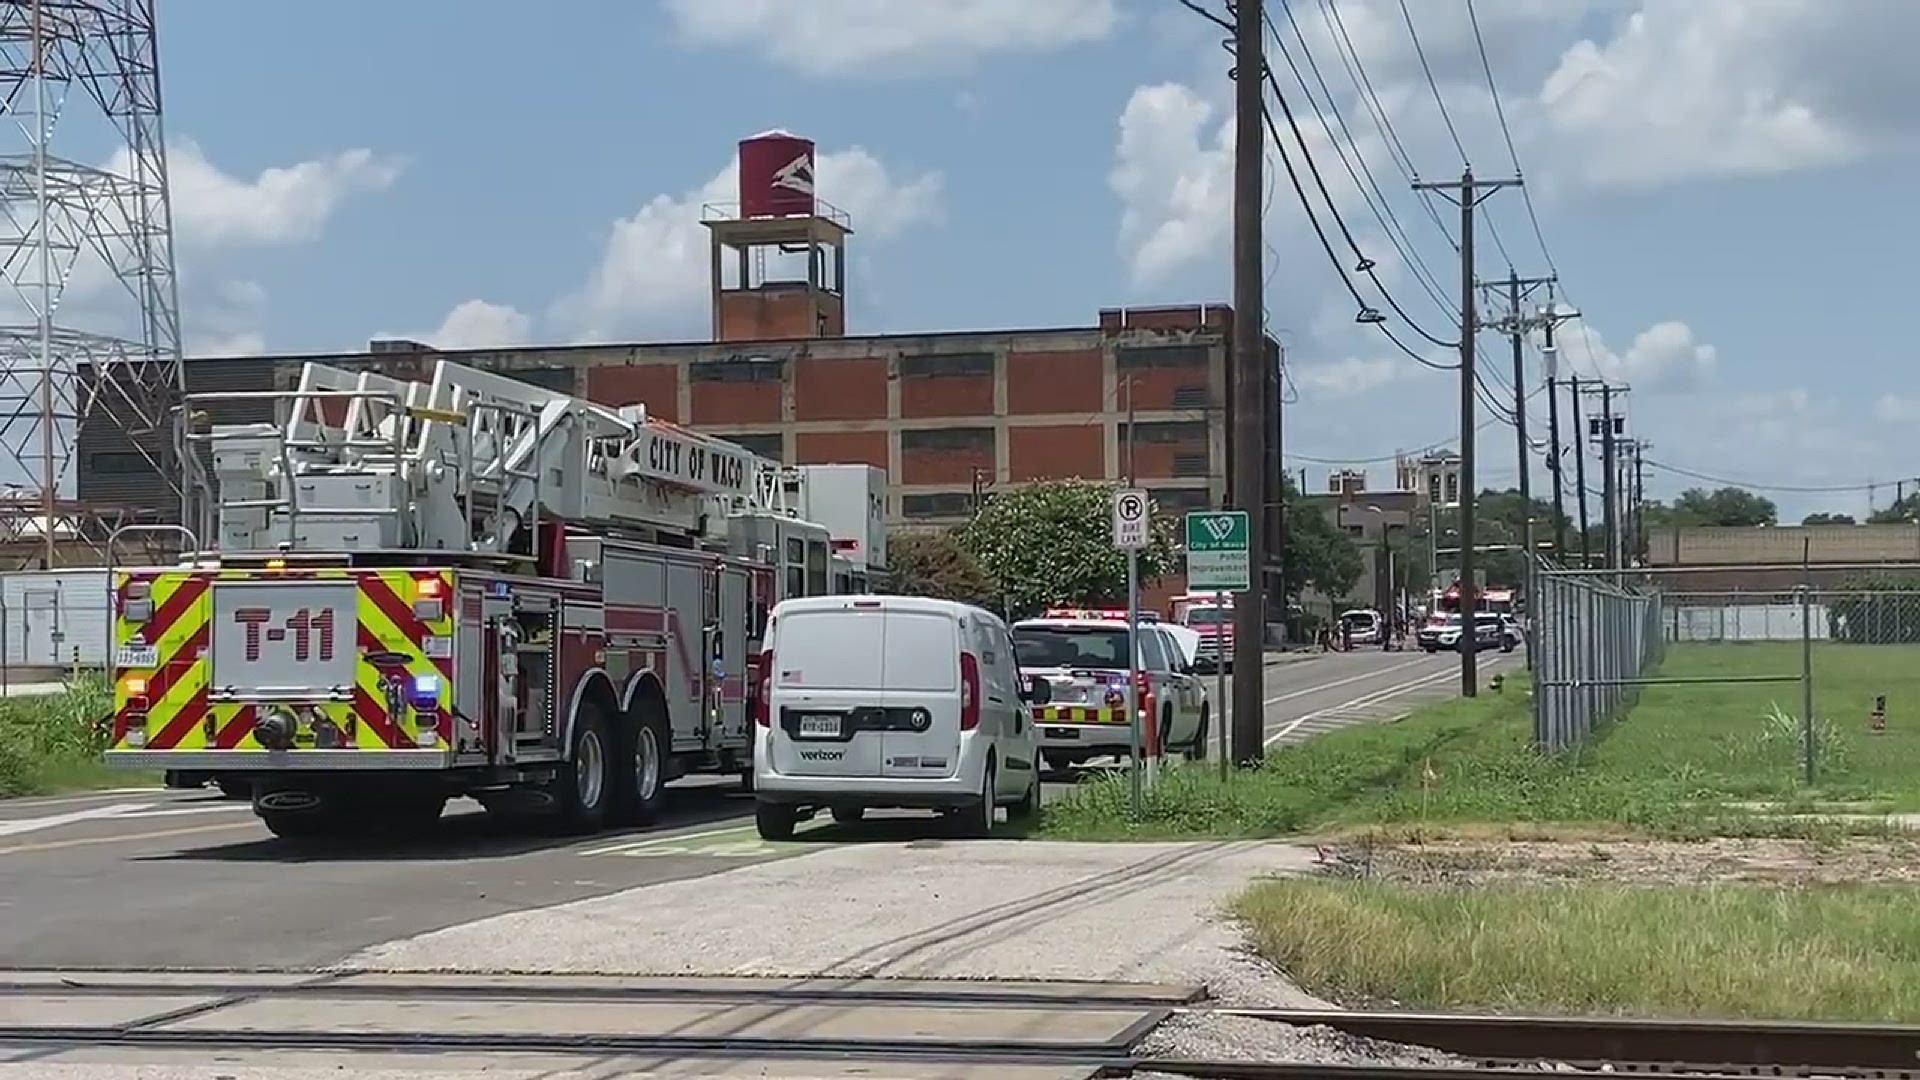 Avoid Area: Waco Fire and Hazmat respond to gas leak near 300 S 11th Street in Downtown Waco.
Credit: Ryan Fite